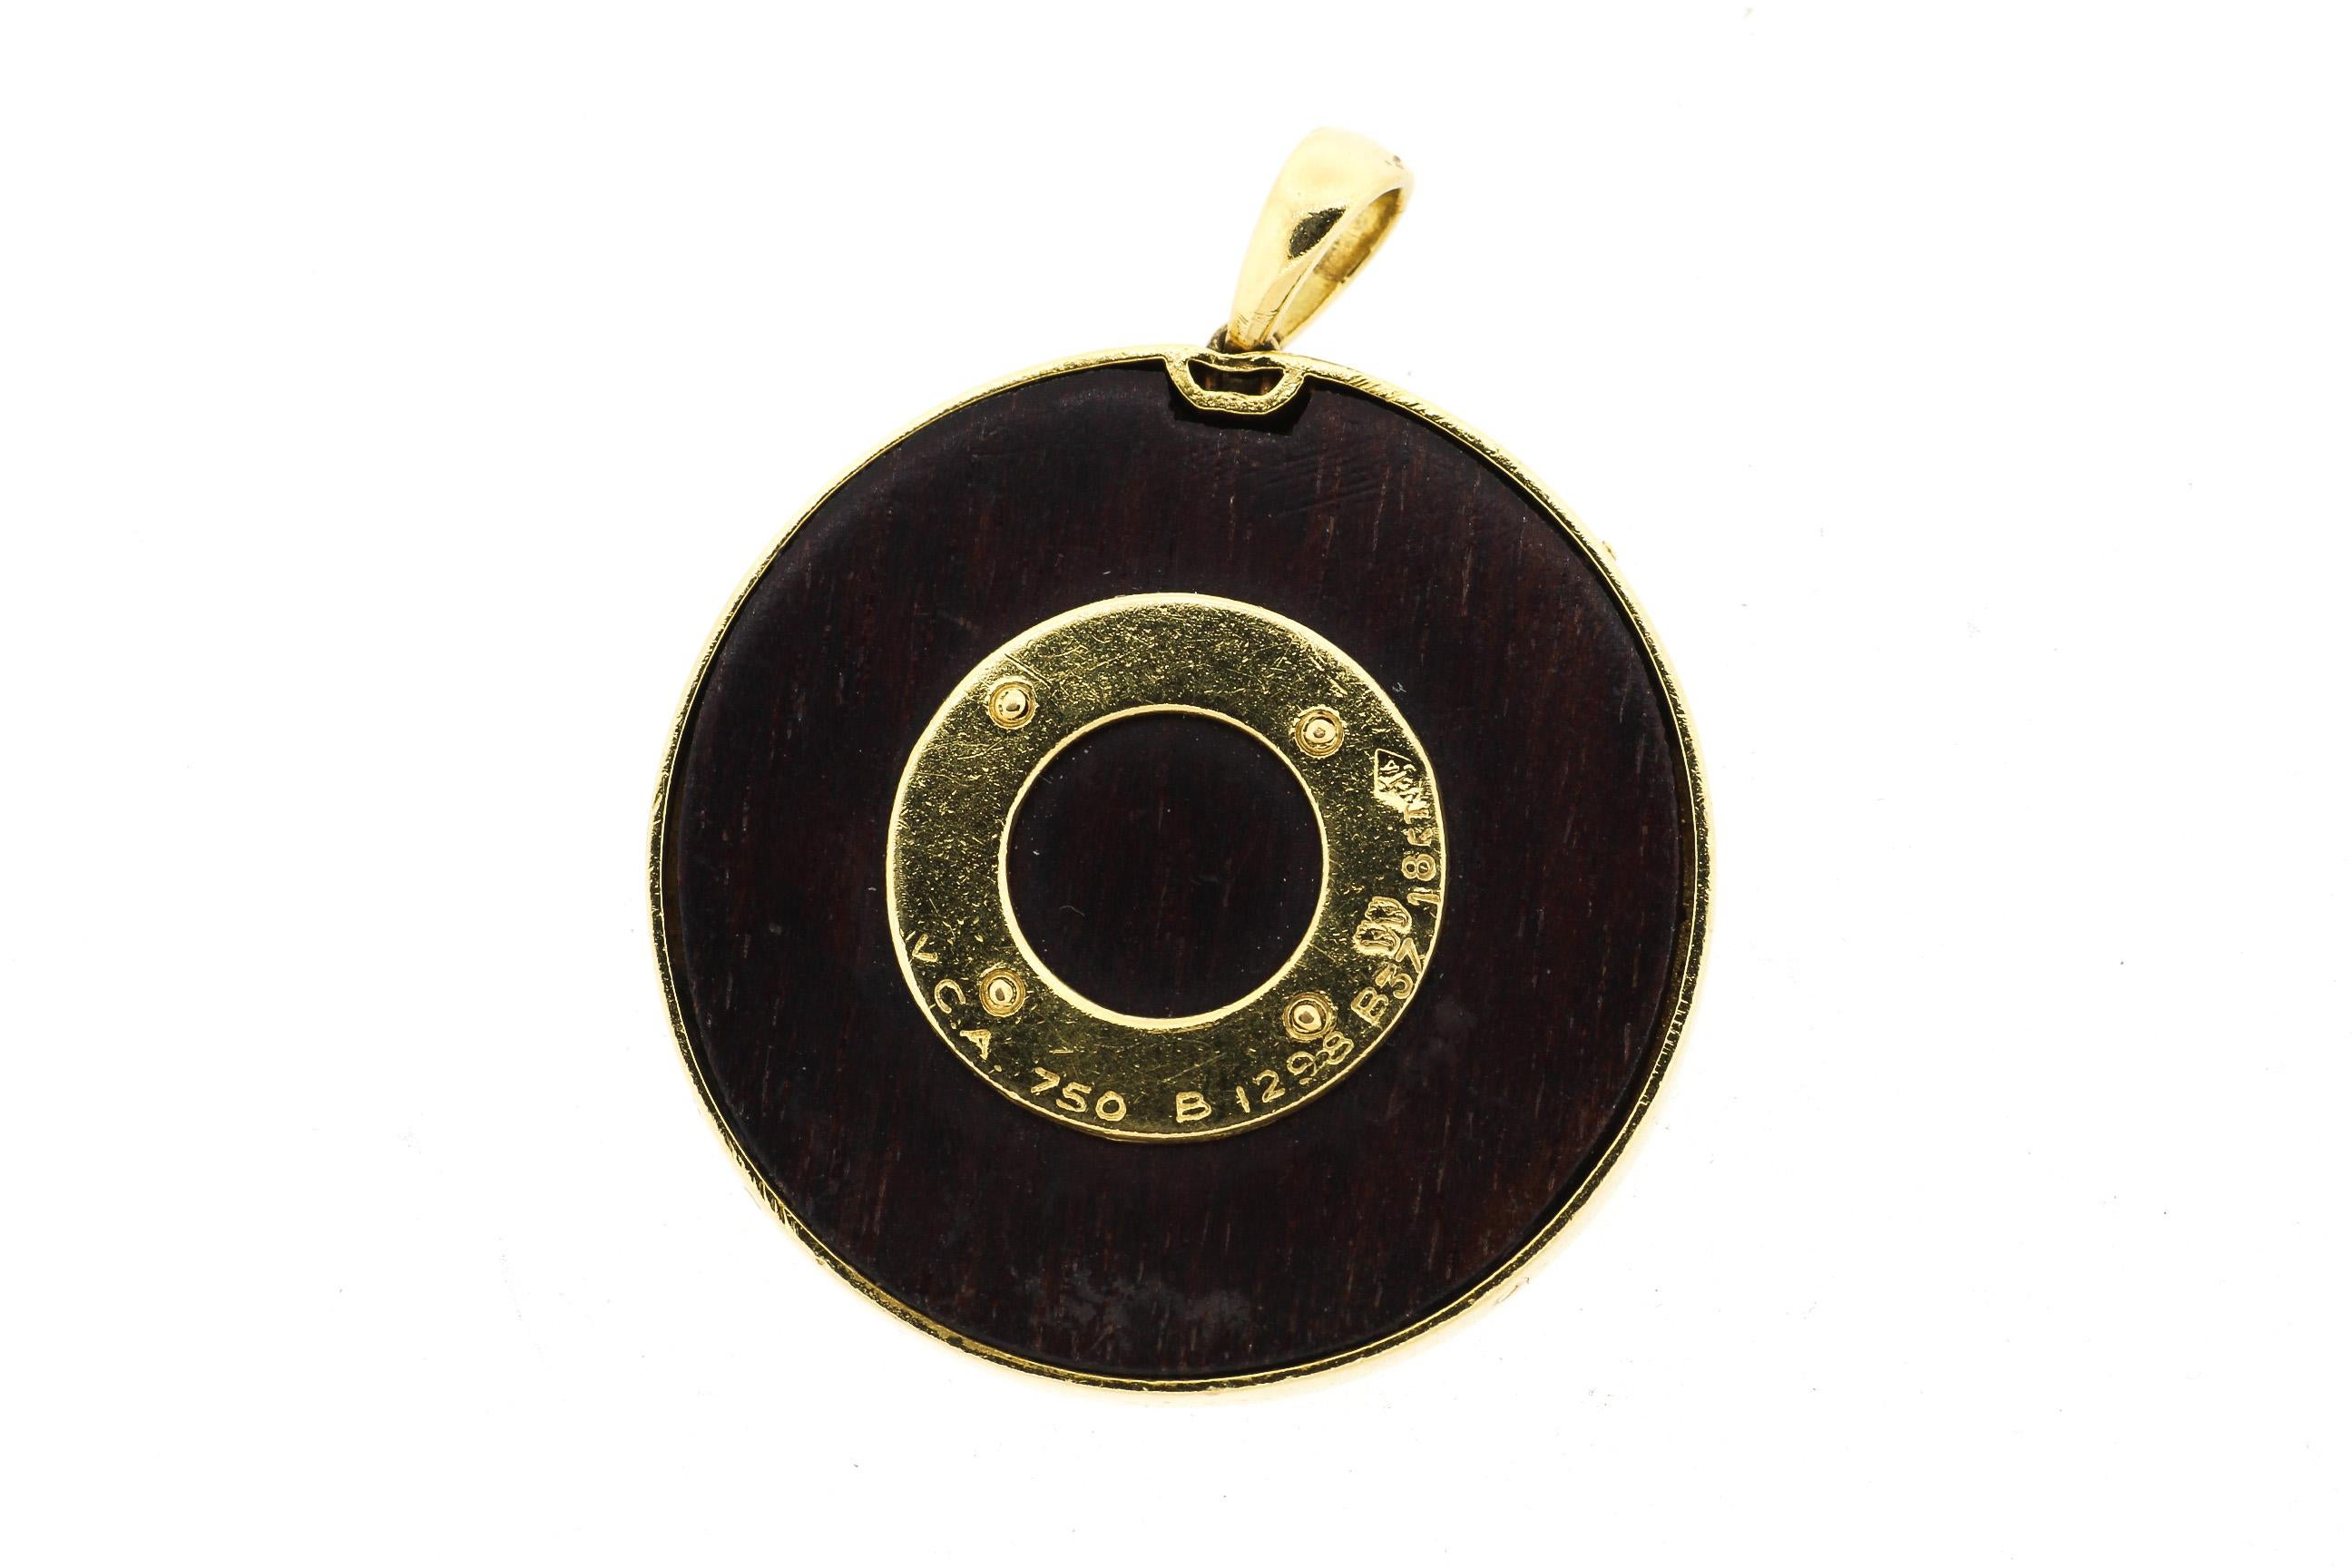 Vintage 18k yellow gold and wood clover pendant with the French saying, “Je Te Porterai Bonheur” written around the clover. It translates to “I will bring you luck.” A chic French charm made in gold and wood by Van Cleef & Arpels circa 1960. These